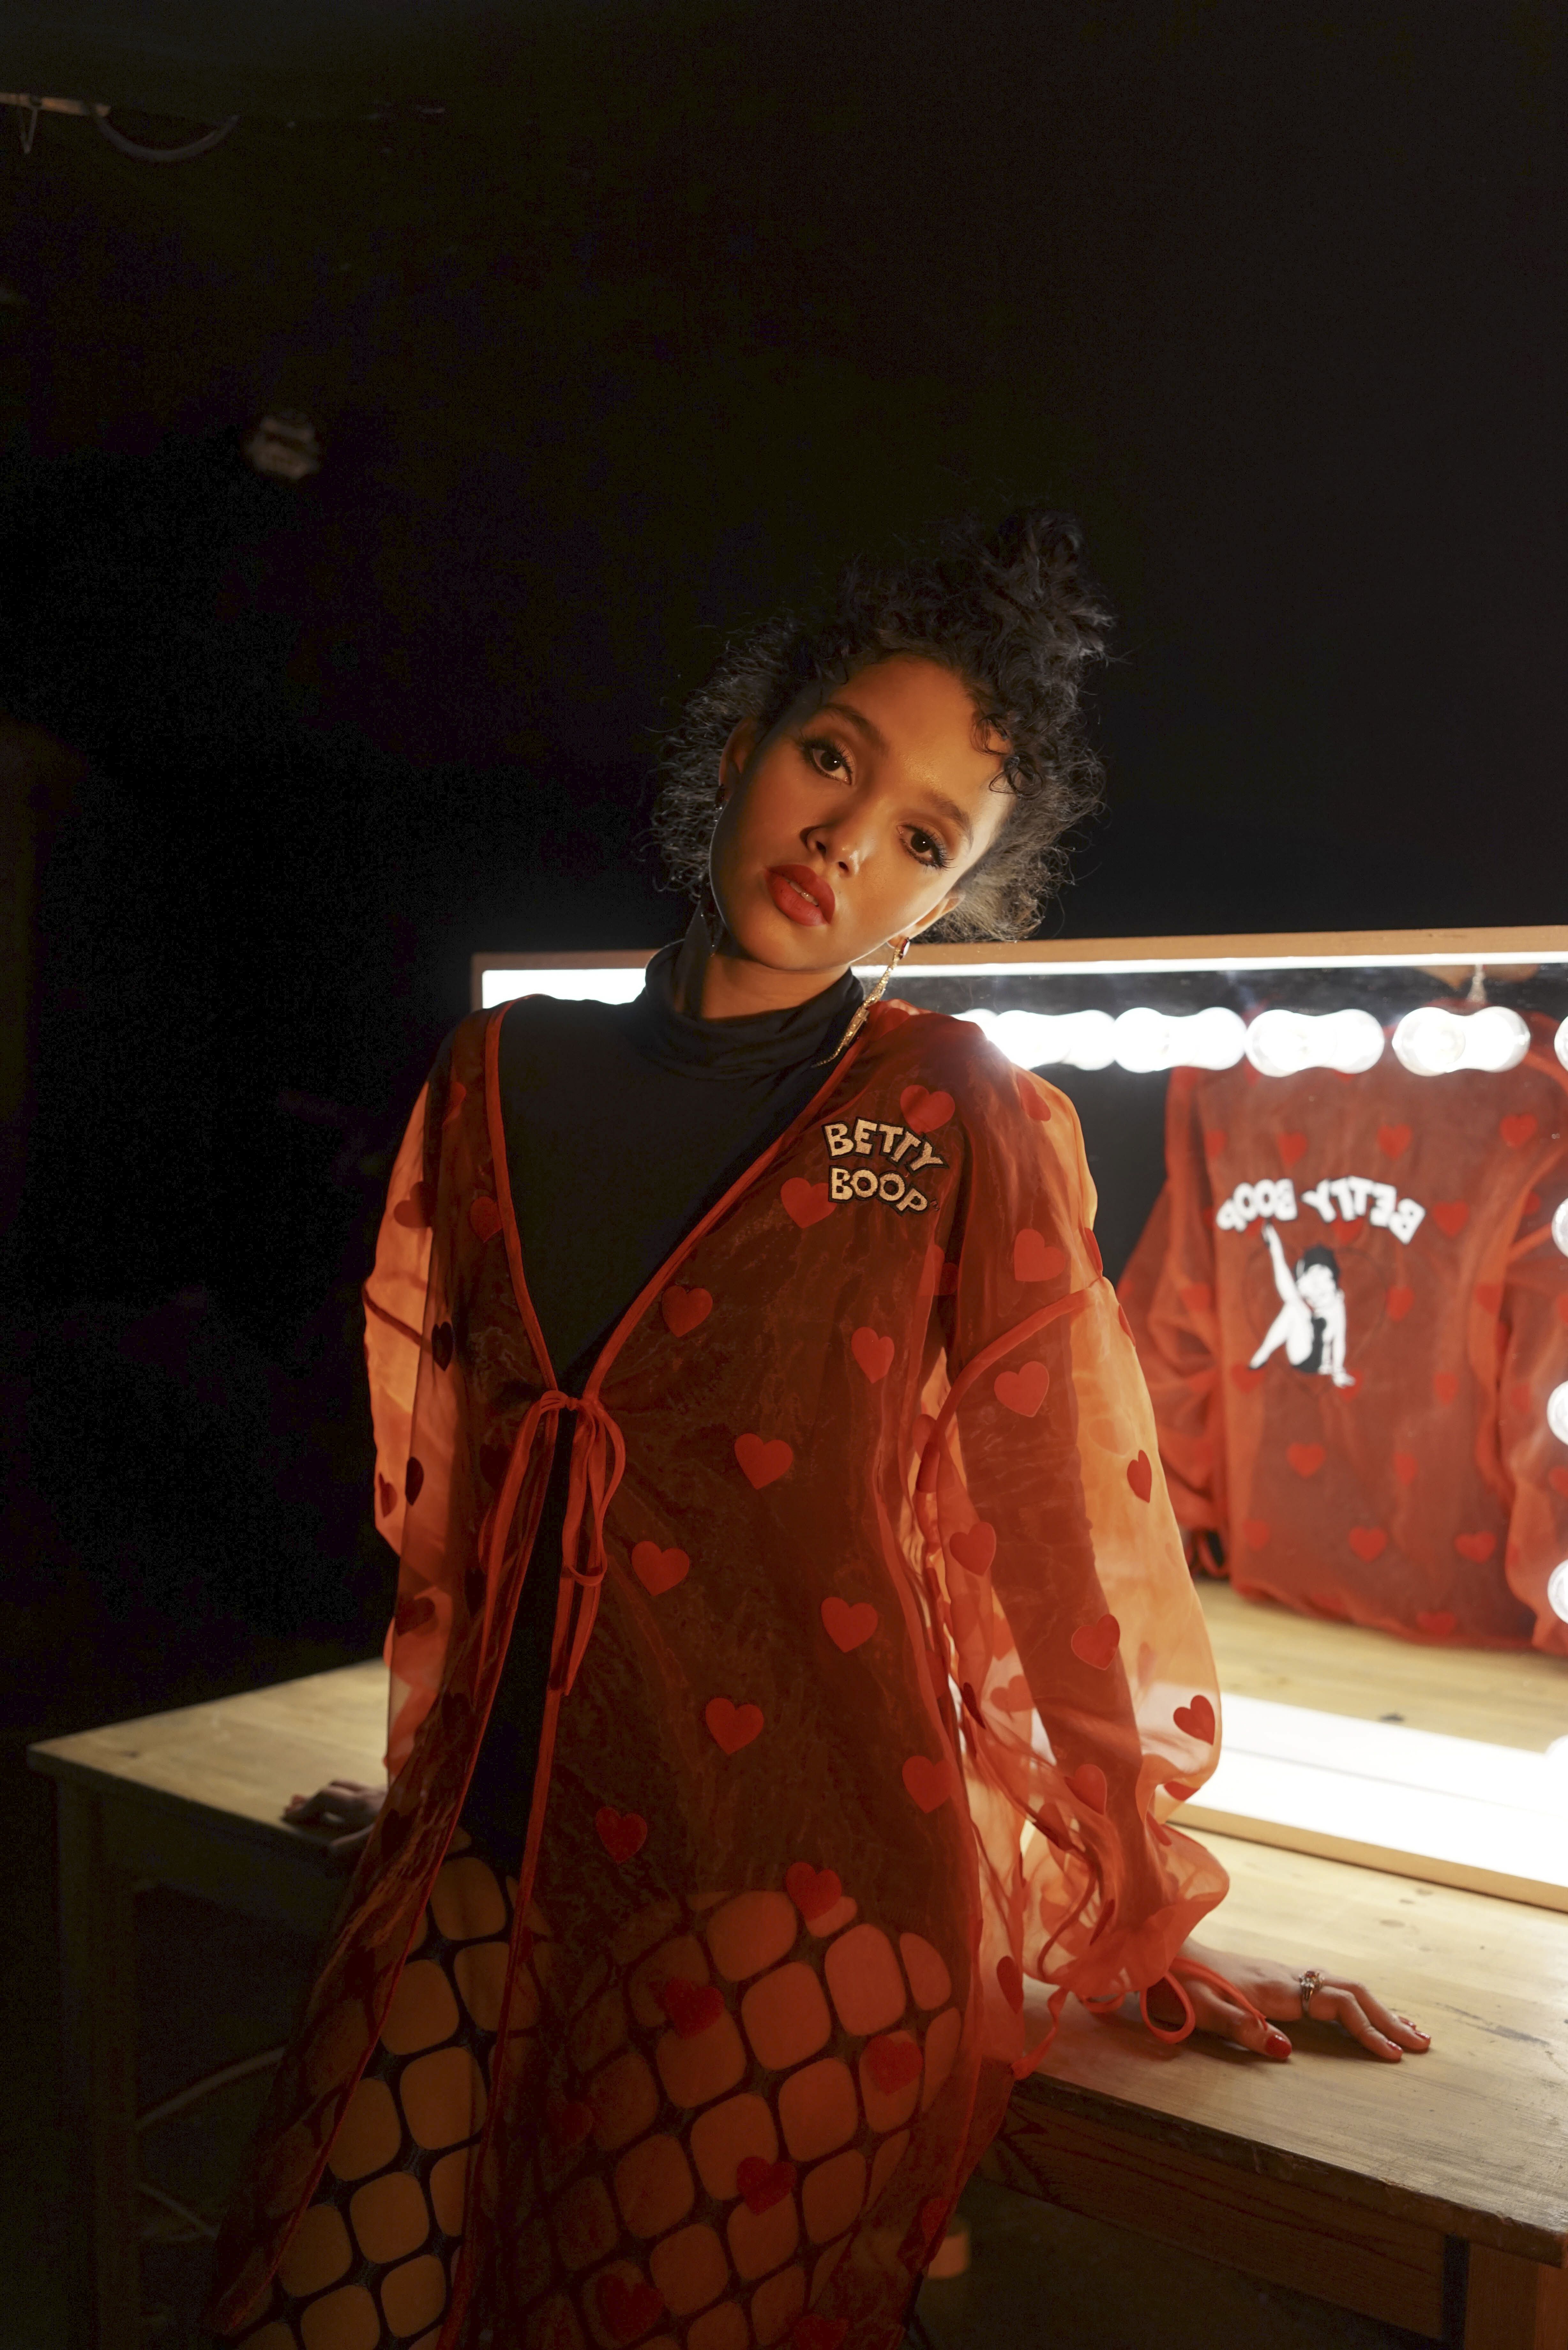 betty boop is the latest cartoon character to get her own clothing collection